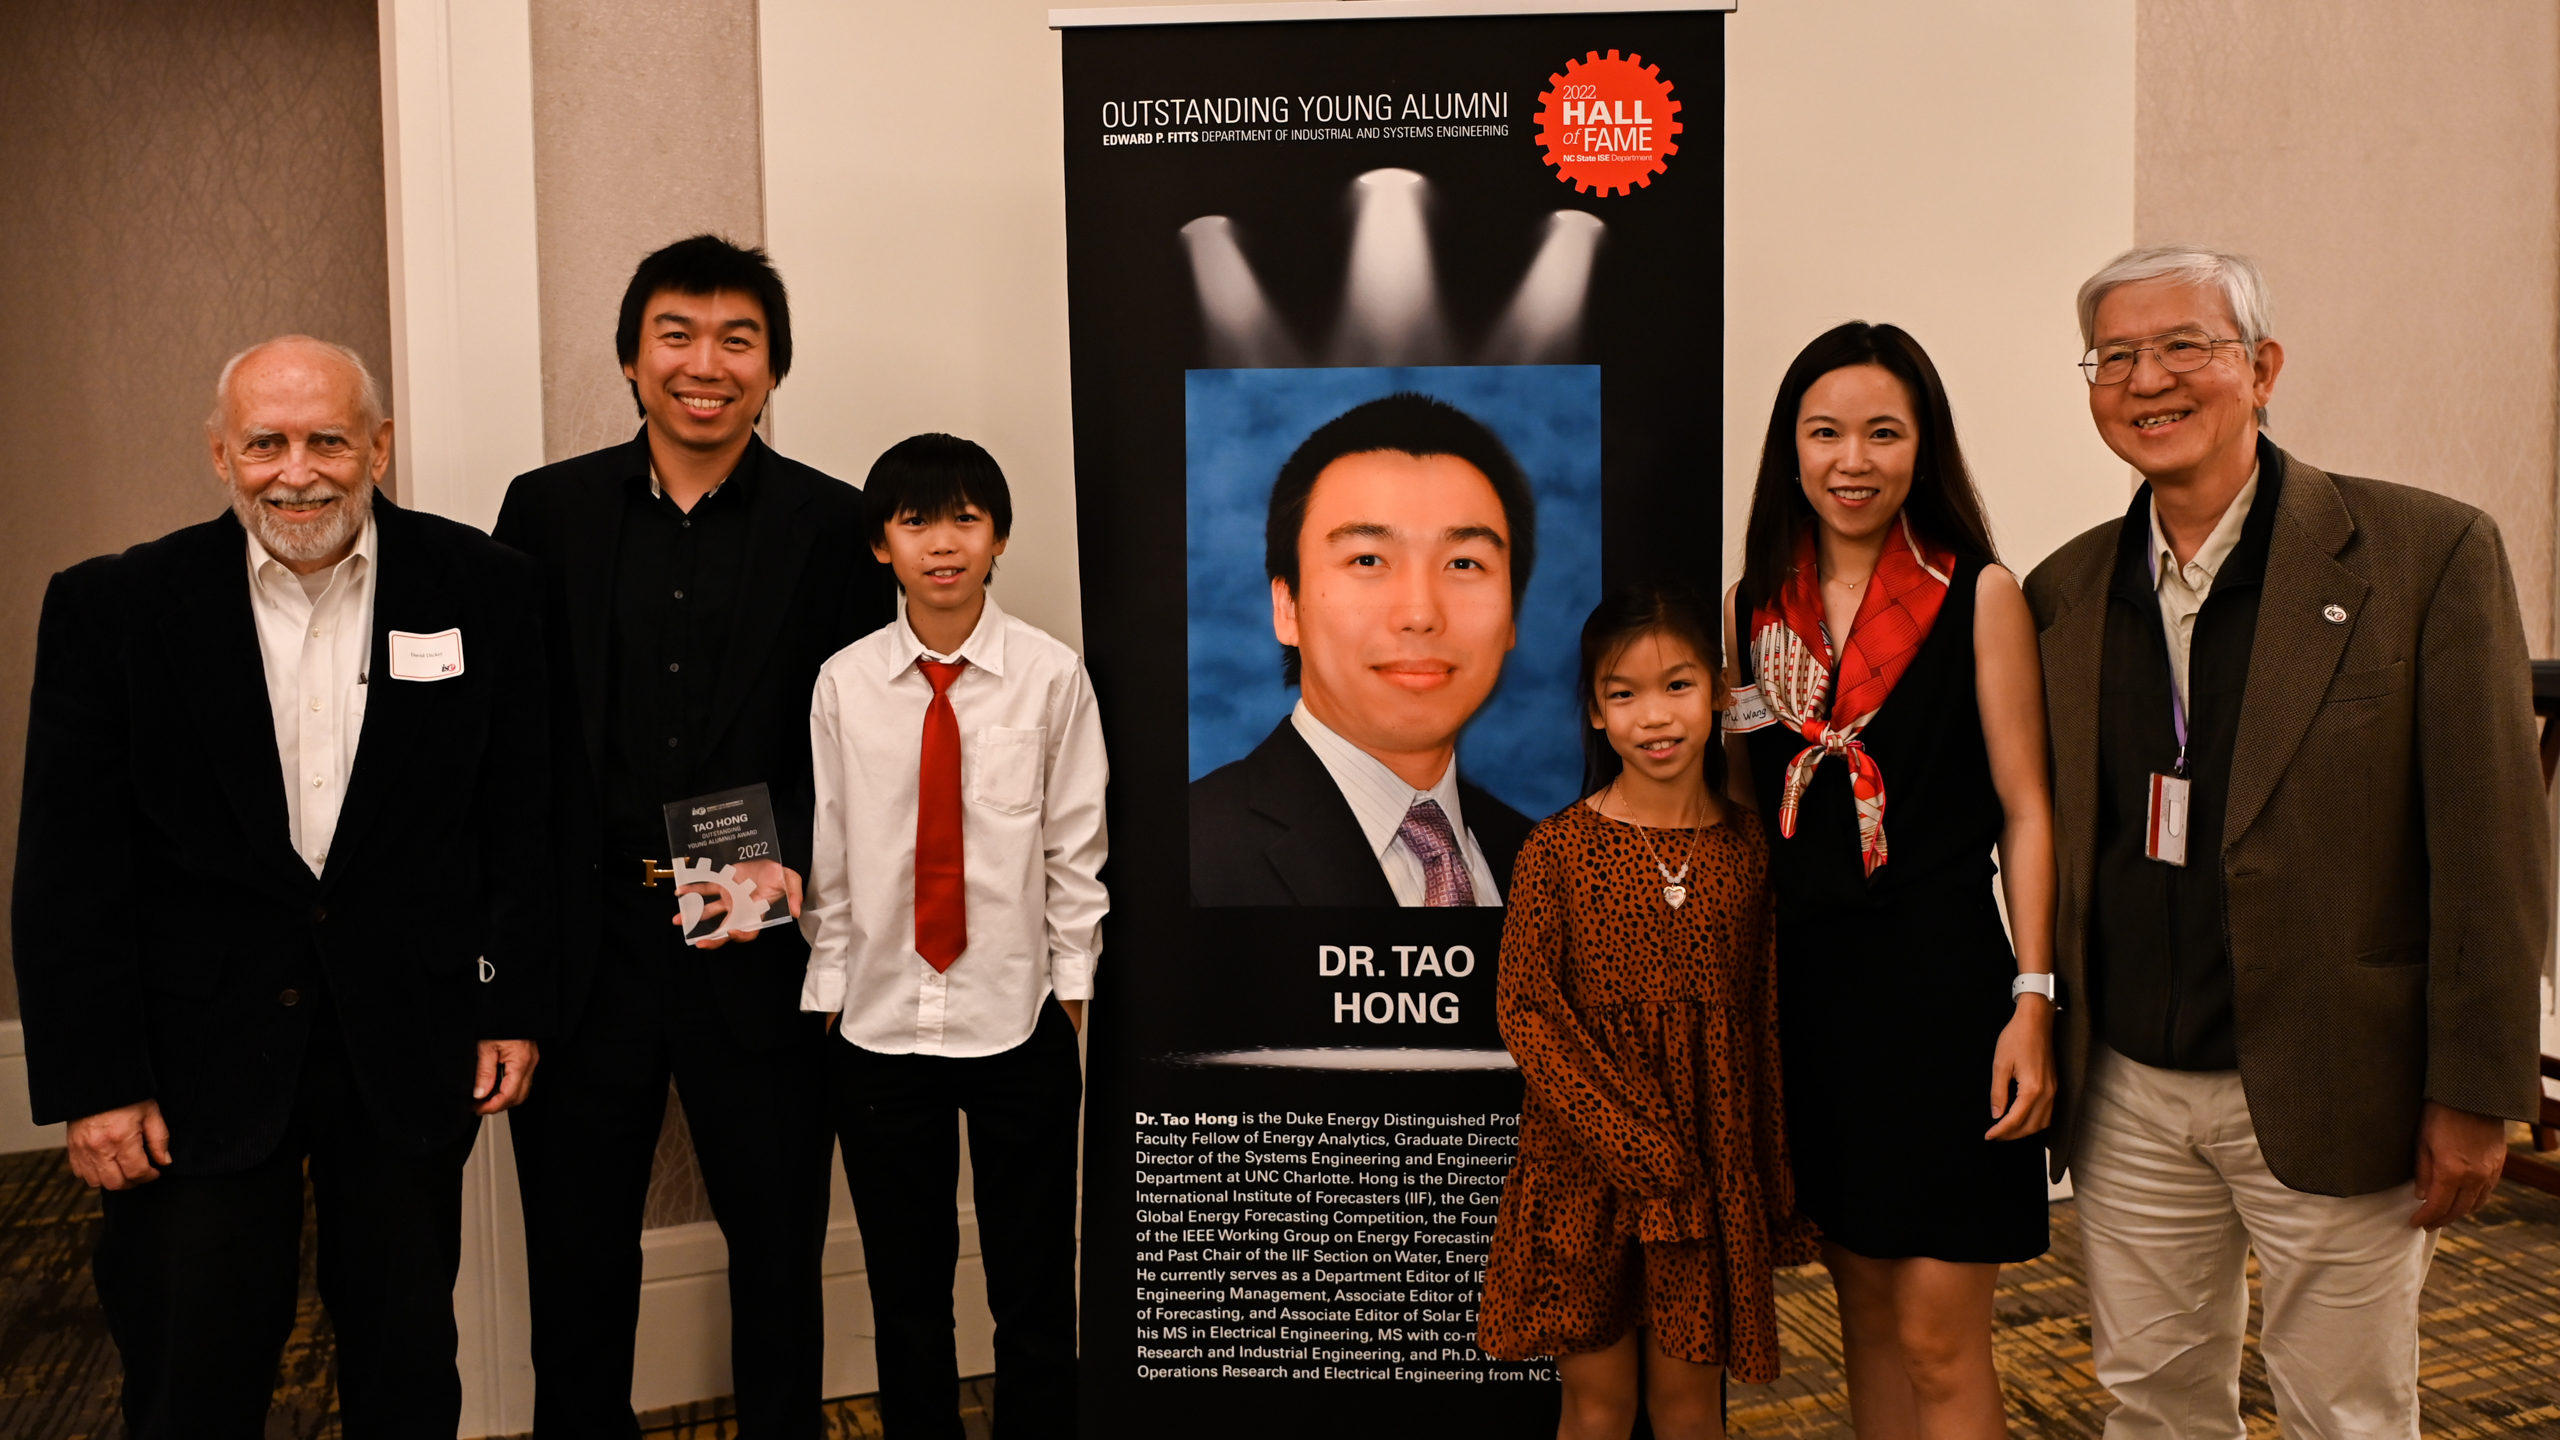 Dr. Tao Hong, his family and friends posing in front of his Outstanding Young Alumni banner